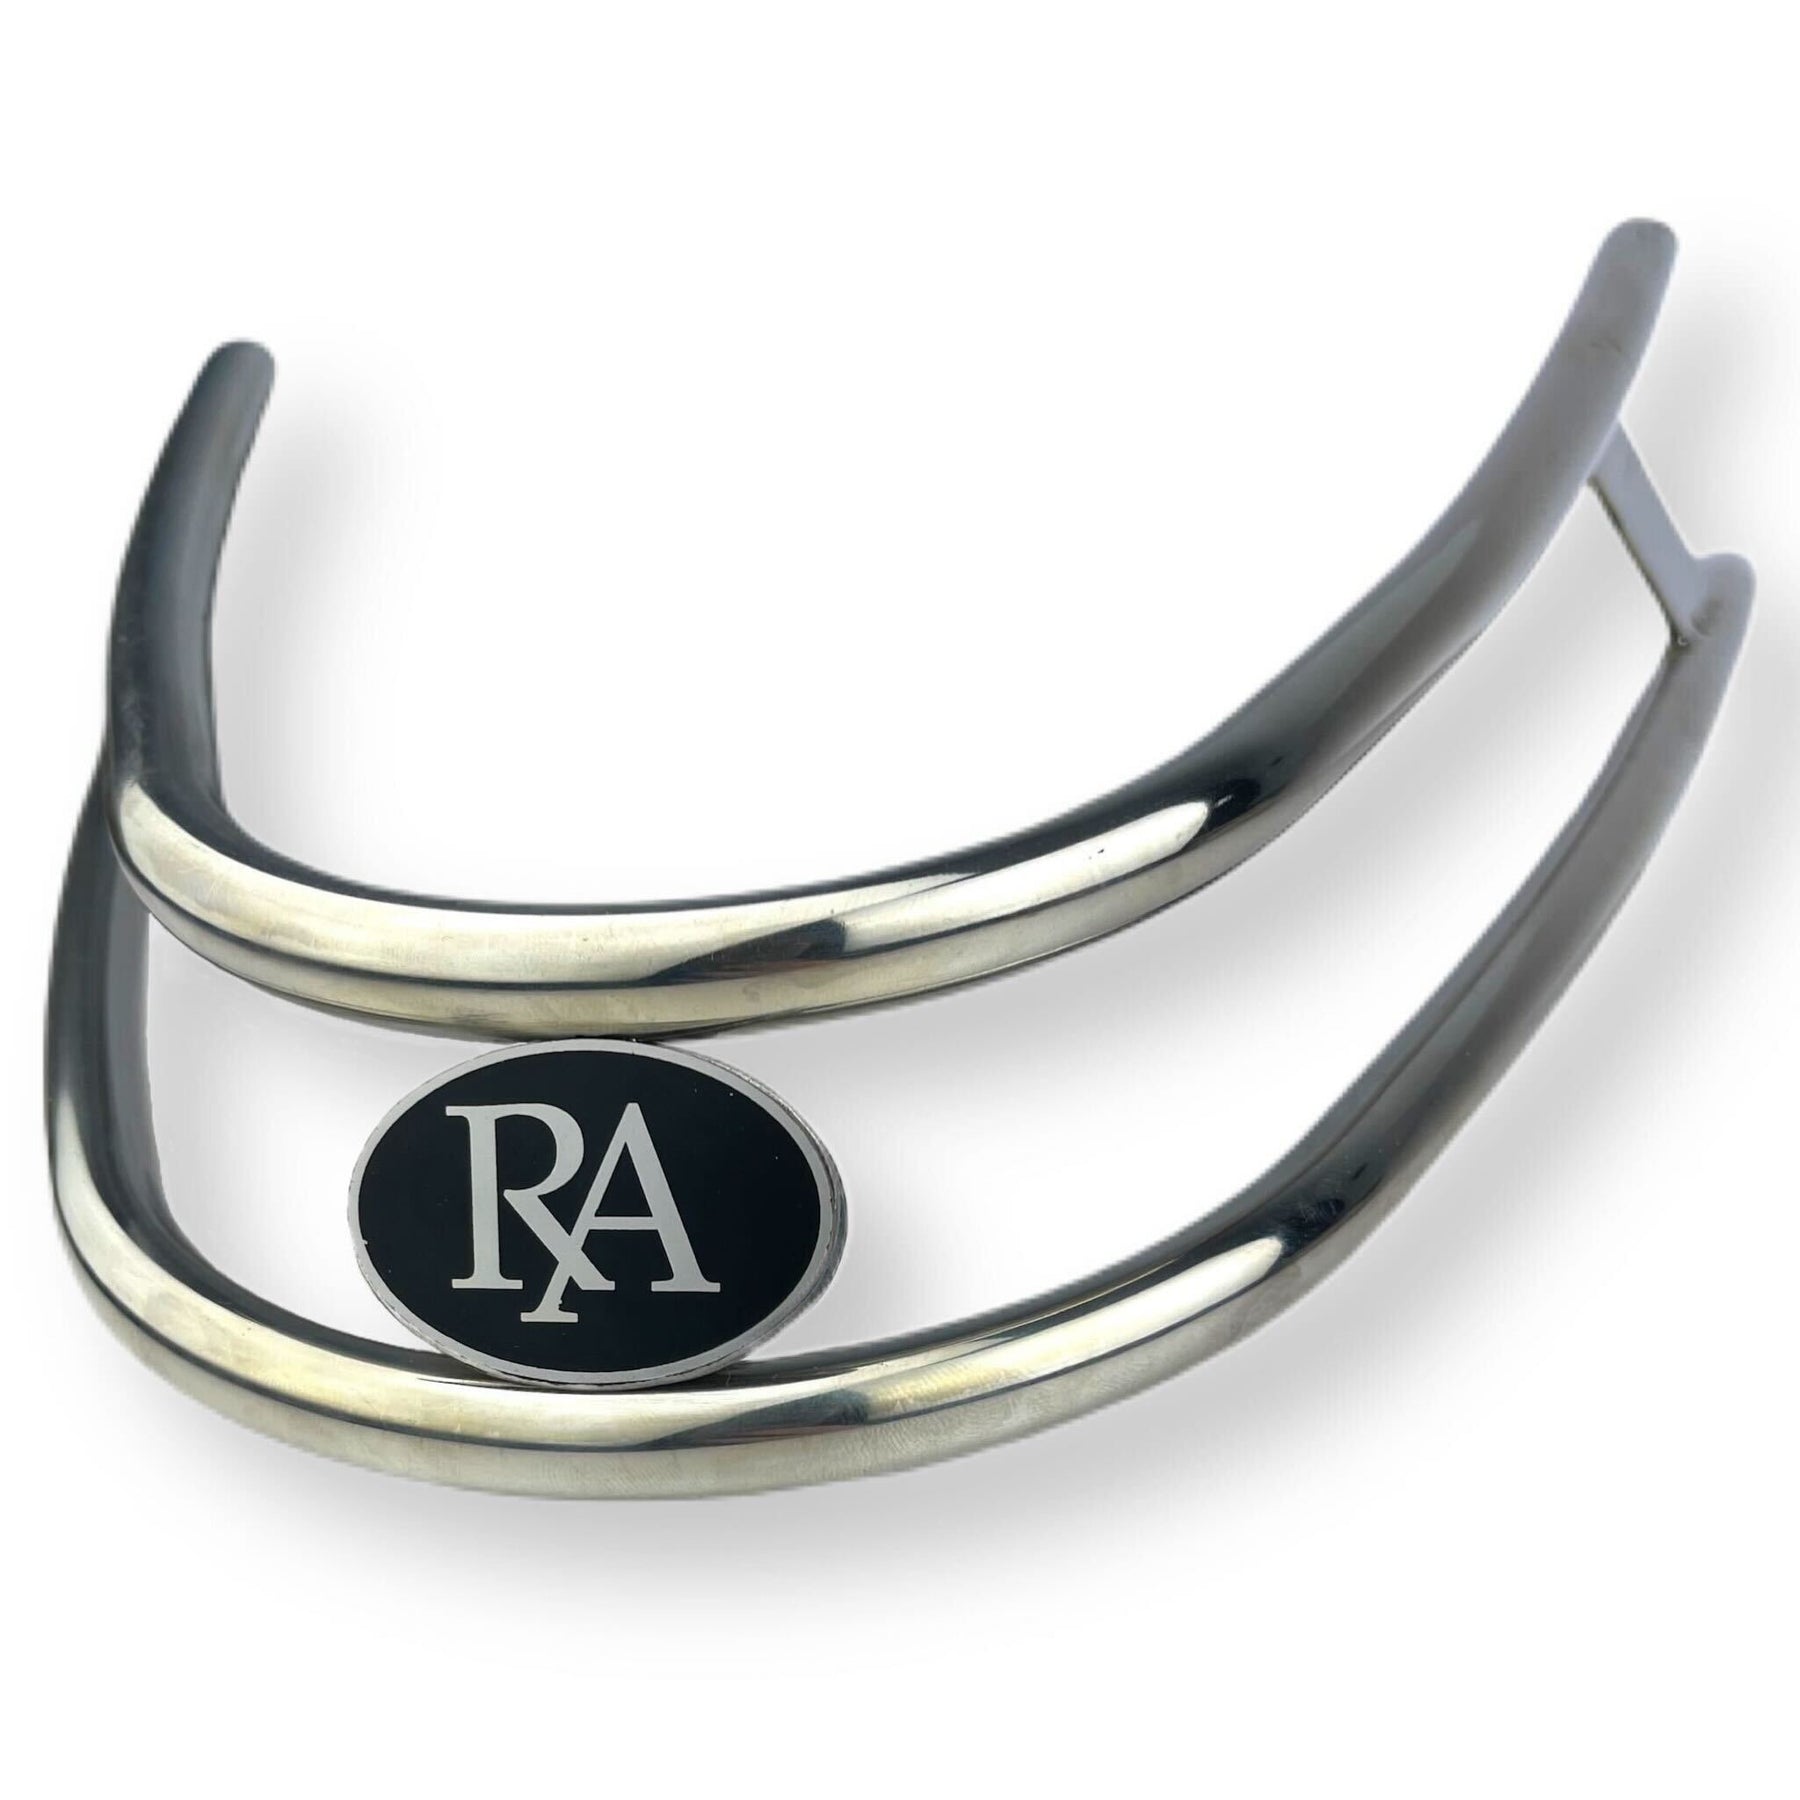 Scomadi Royal Alloy Front Bumper Bar - Double Trim - Polished Stainless Steel - Royal Alloy Badge